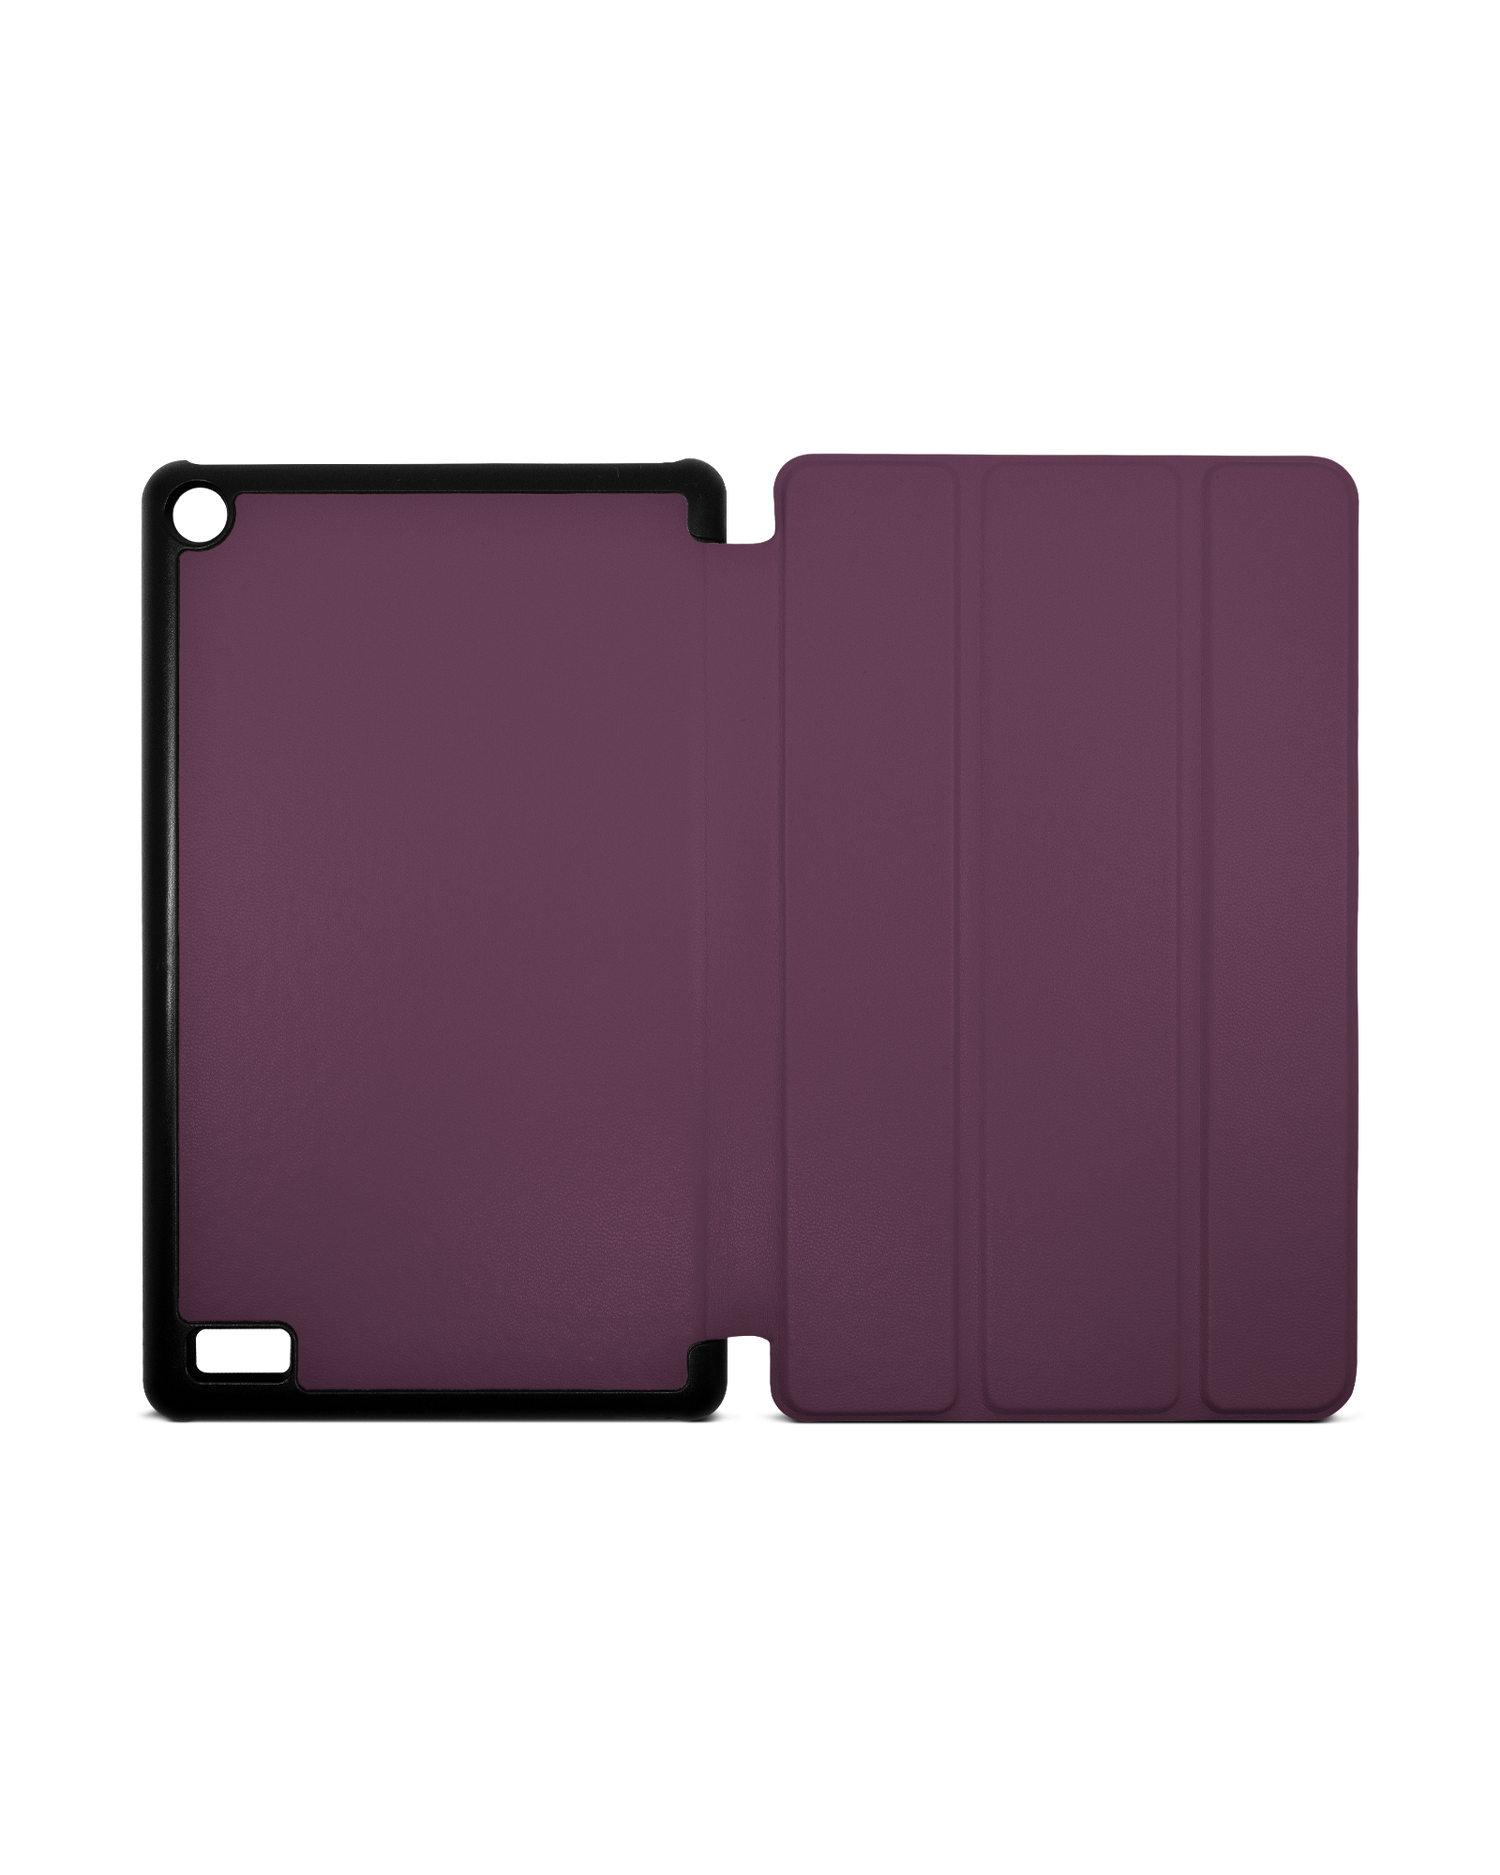 PLUM Tablet Smart Case for Amazon Fire 7: Opened